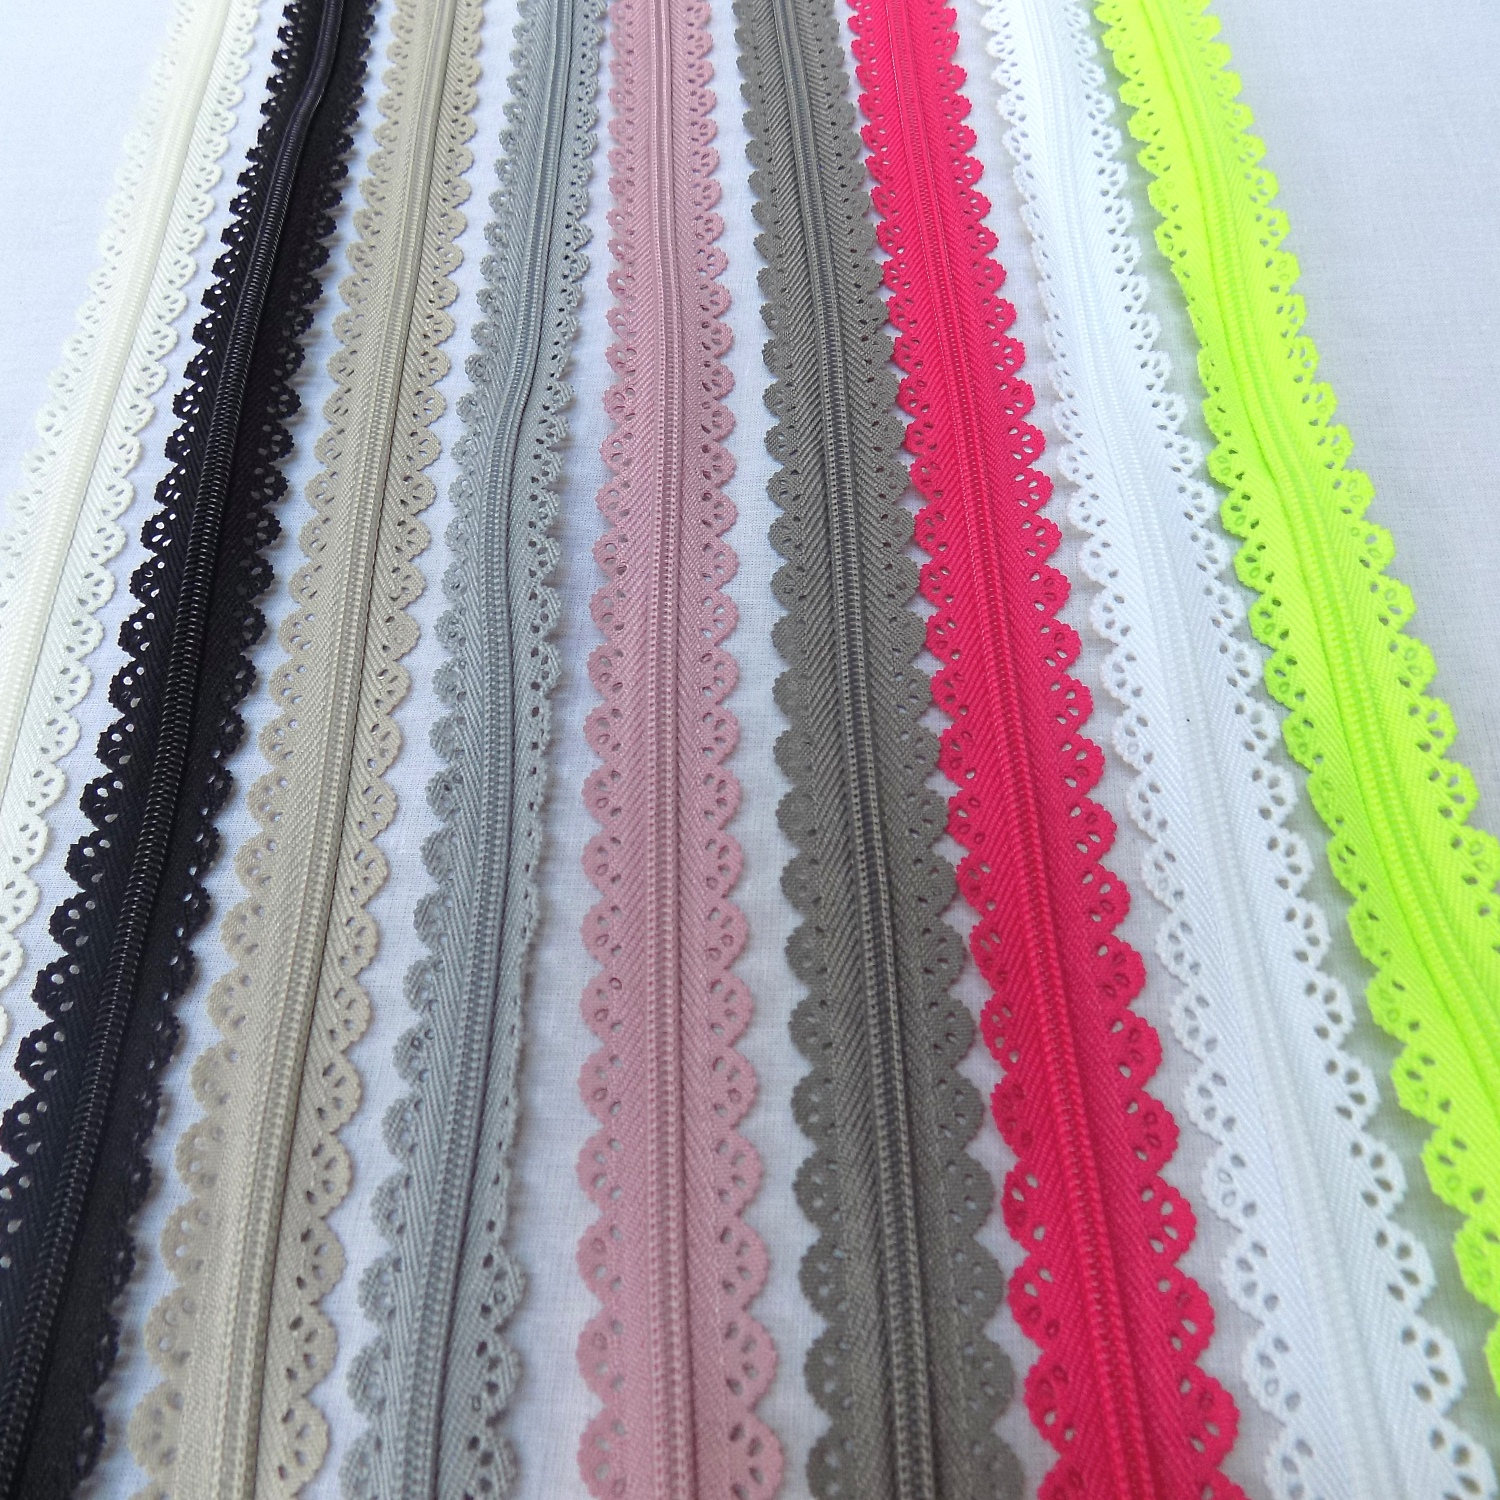 Yuedi 60pcs 20 inch Zippers-25colors Nylon Coil Zipper Bulk #3 Zippers for Tailor Sewing Crafts